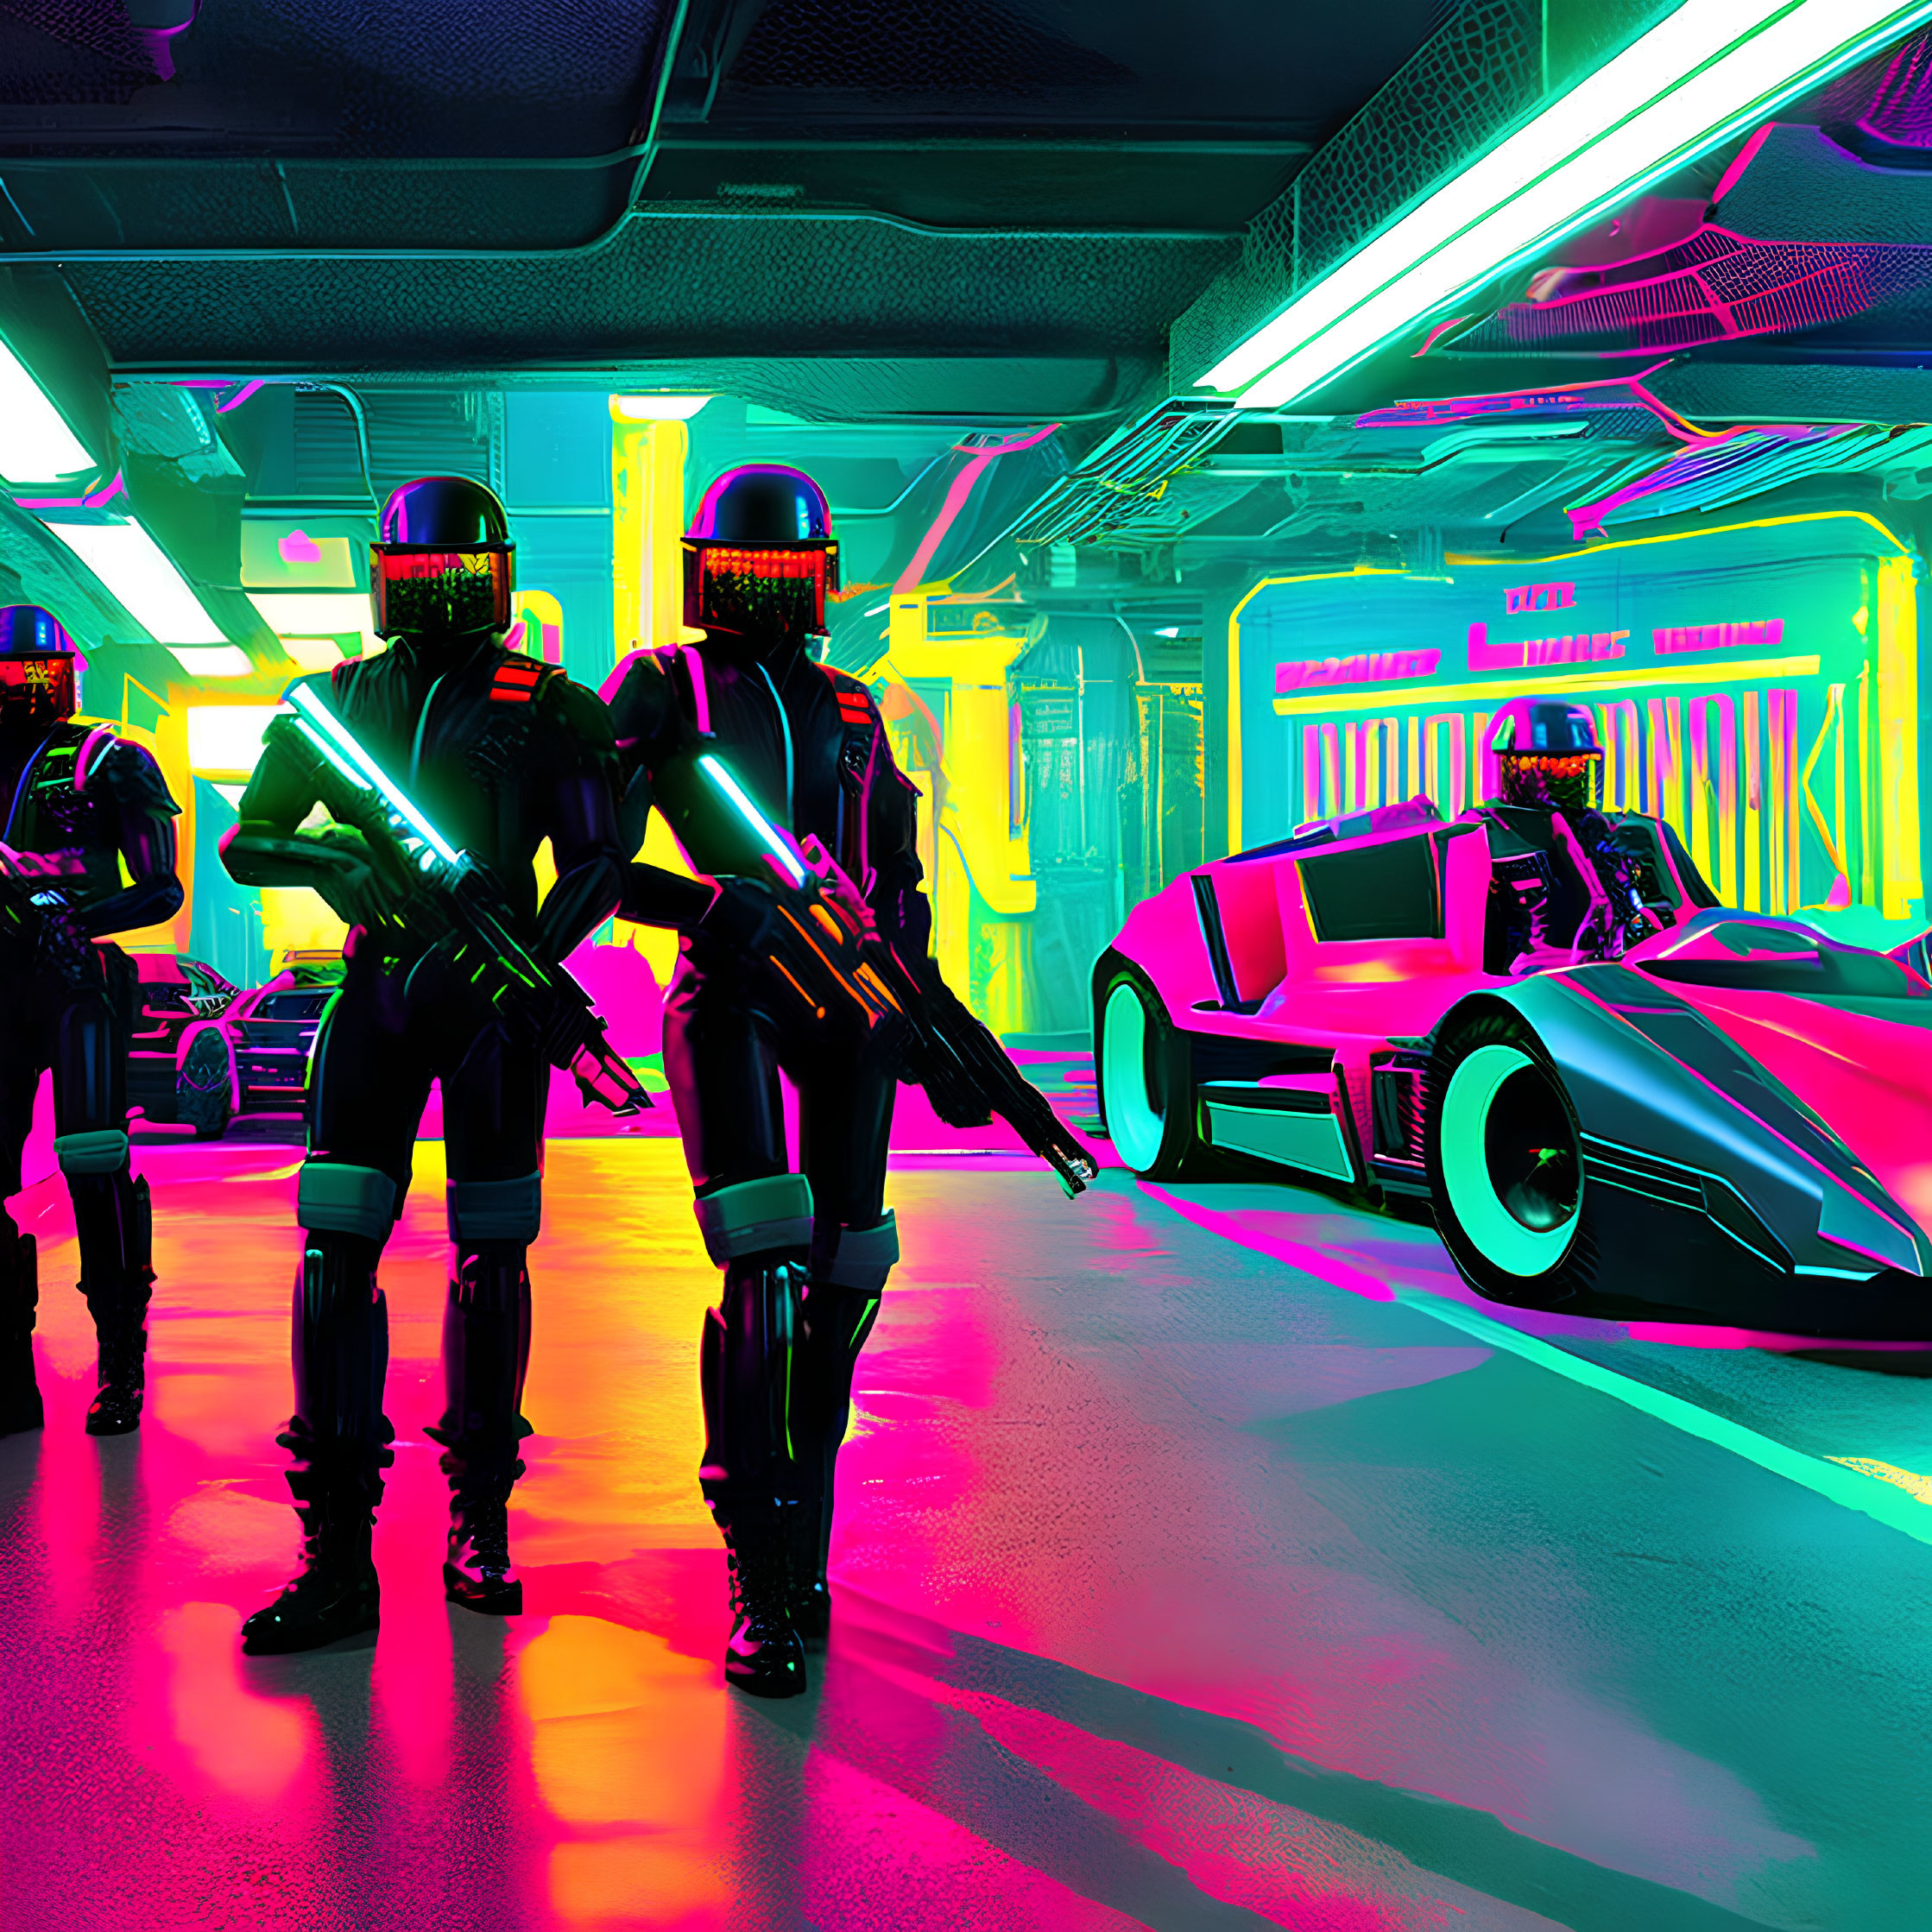 Futuristic soldiers with helmets and rifles in neon-lit garage